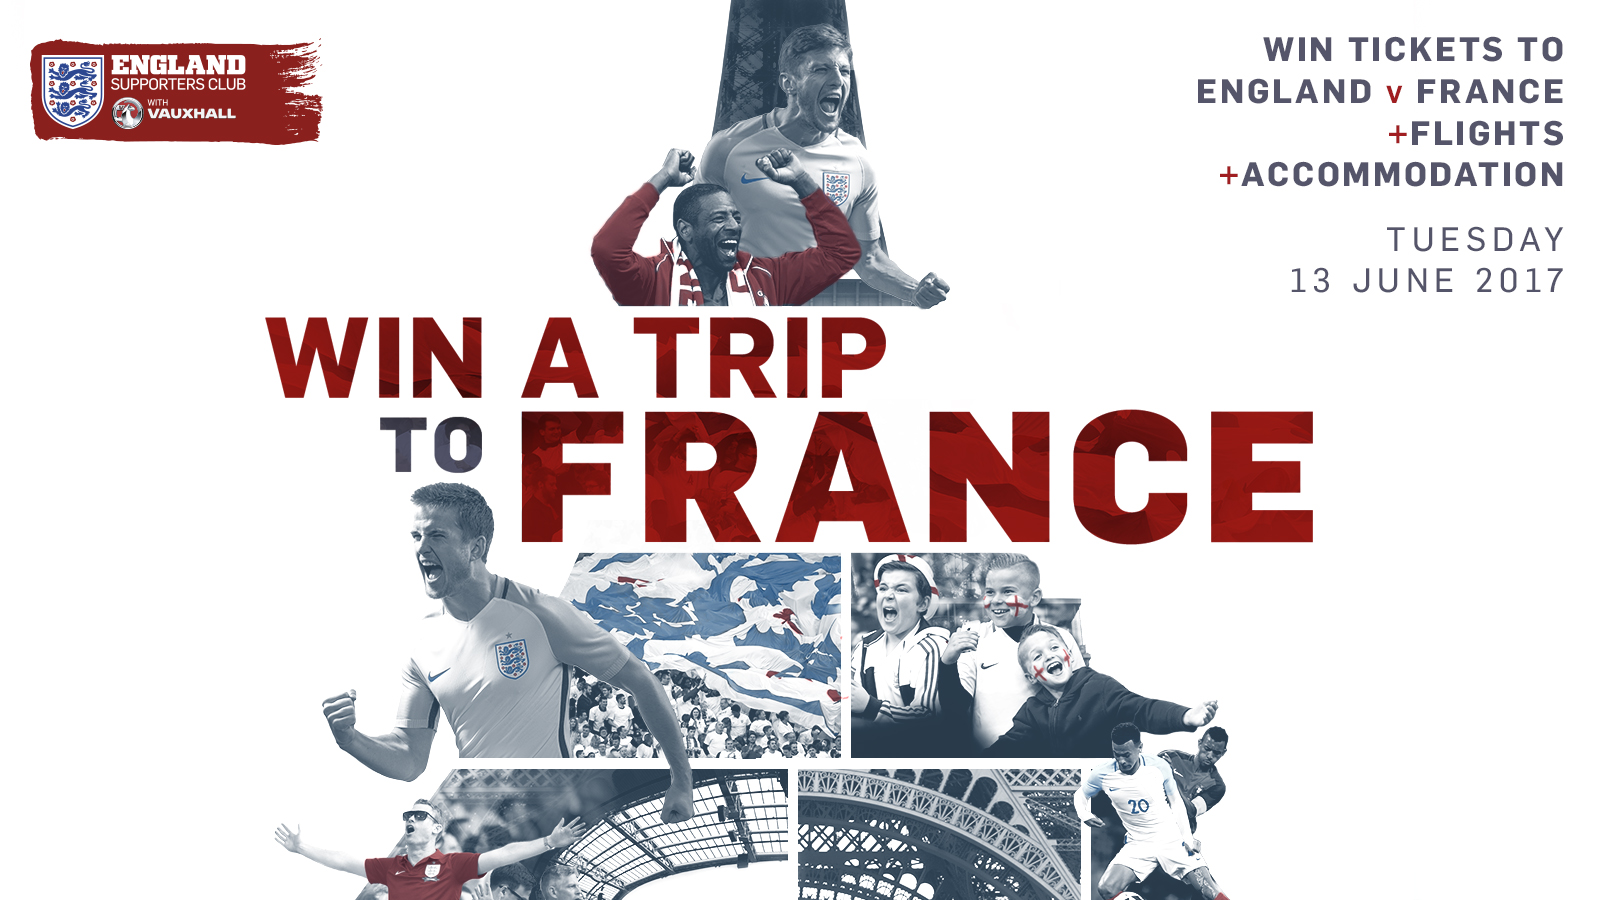 Win a trip to France including tickets, flights and accommodation